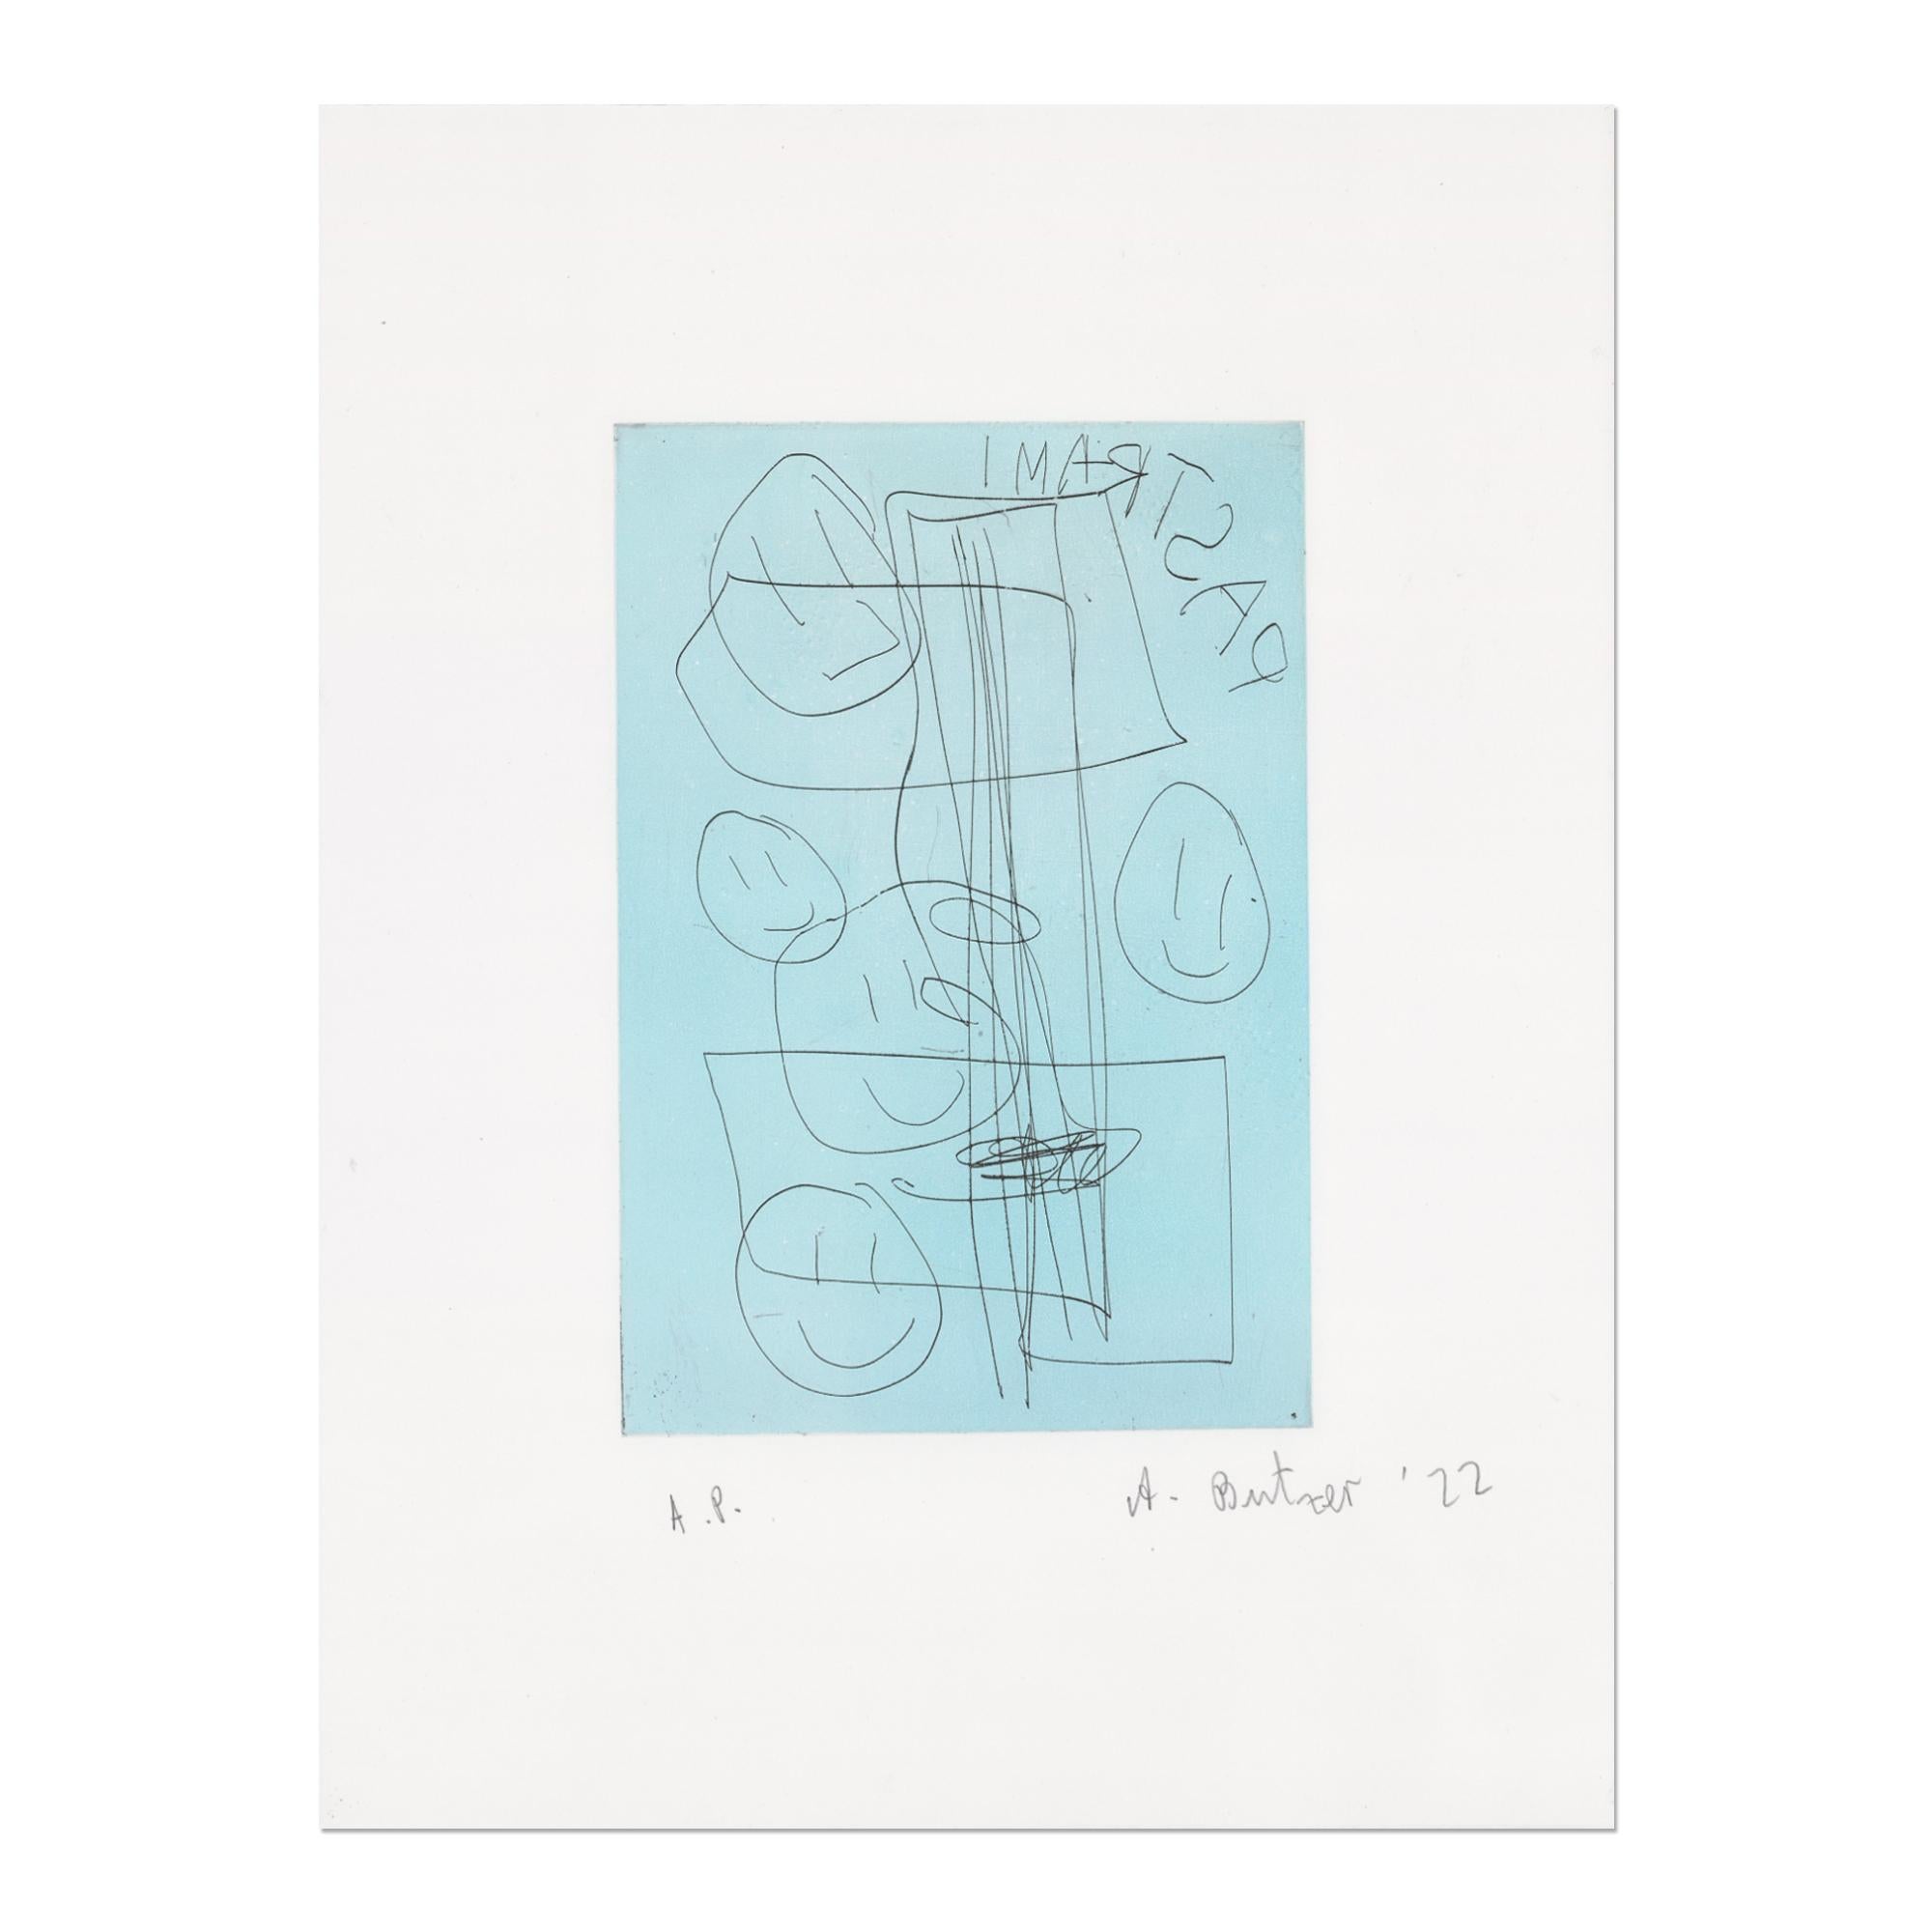 André Butzer (German, b. 1973)
Untitled (Pastrami), 2019/2022
Medium: Etching in colors on wove paper
Dimensions: 43 x 33 cm
Edition of 15: Hand-signed, numbered and dated in pencil